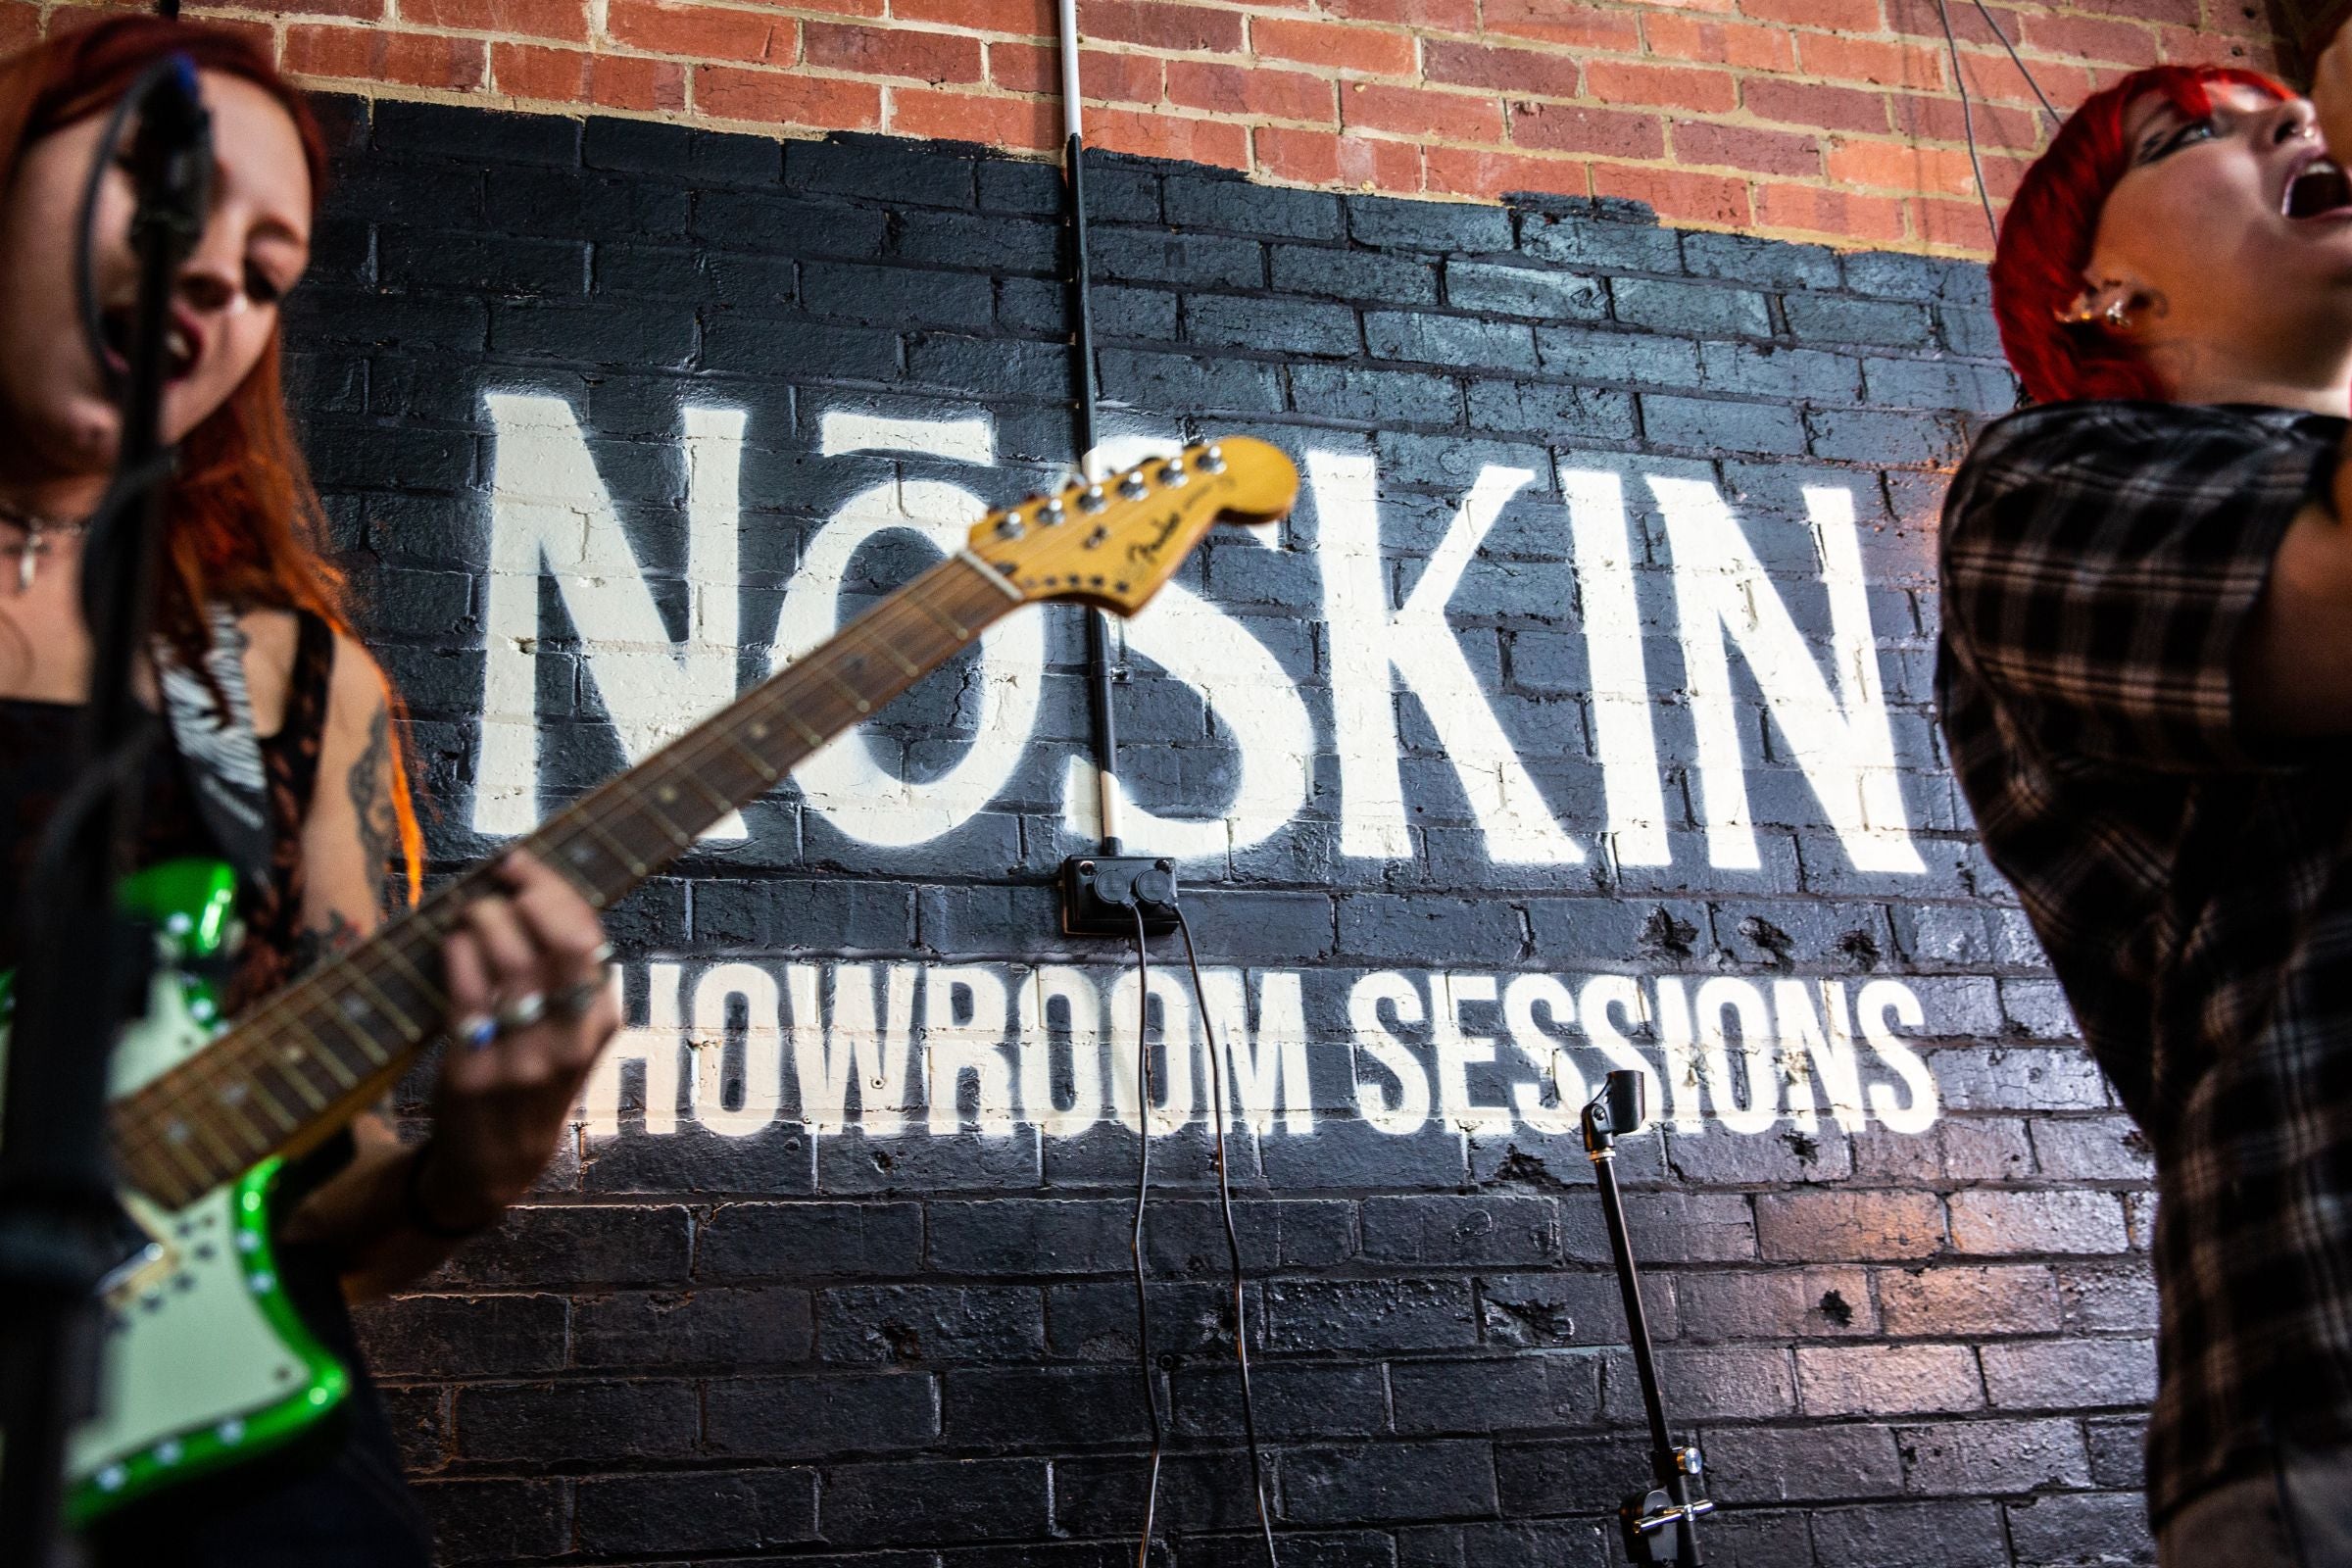 Noskin Showroom Sessions Teen Jesus and the Jean Teasers